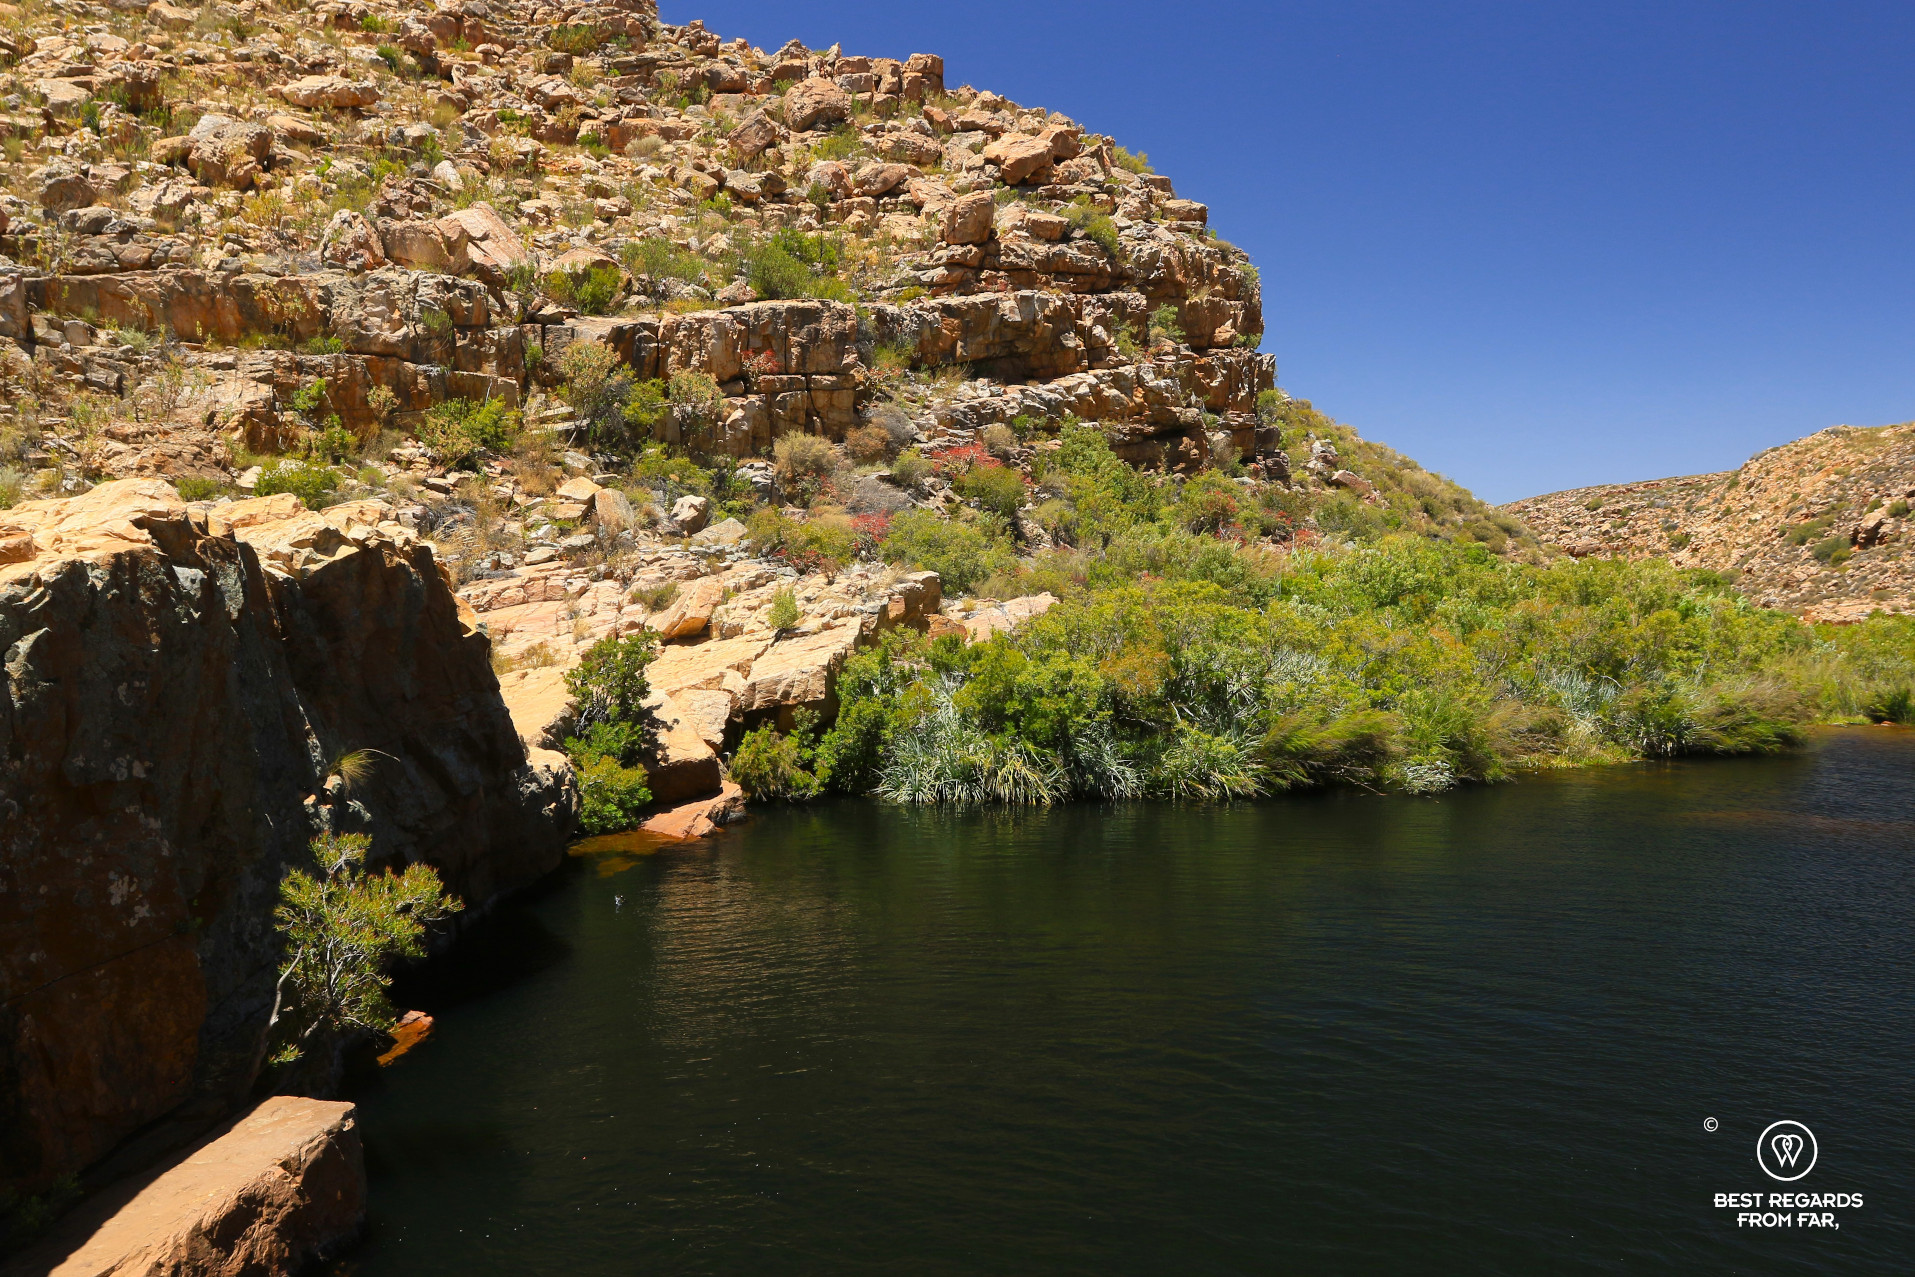 The Maalgat swimming hole, Cederberg, South Africa